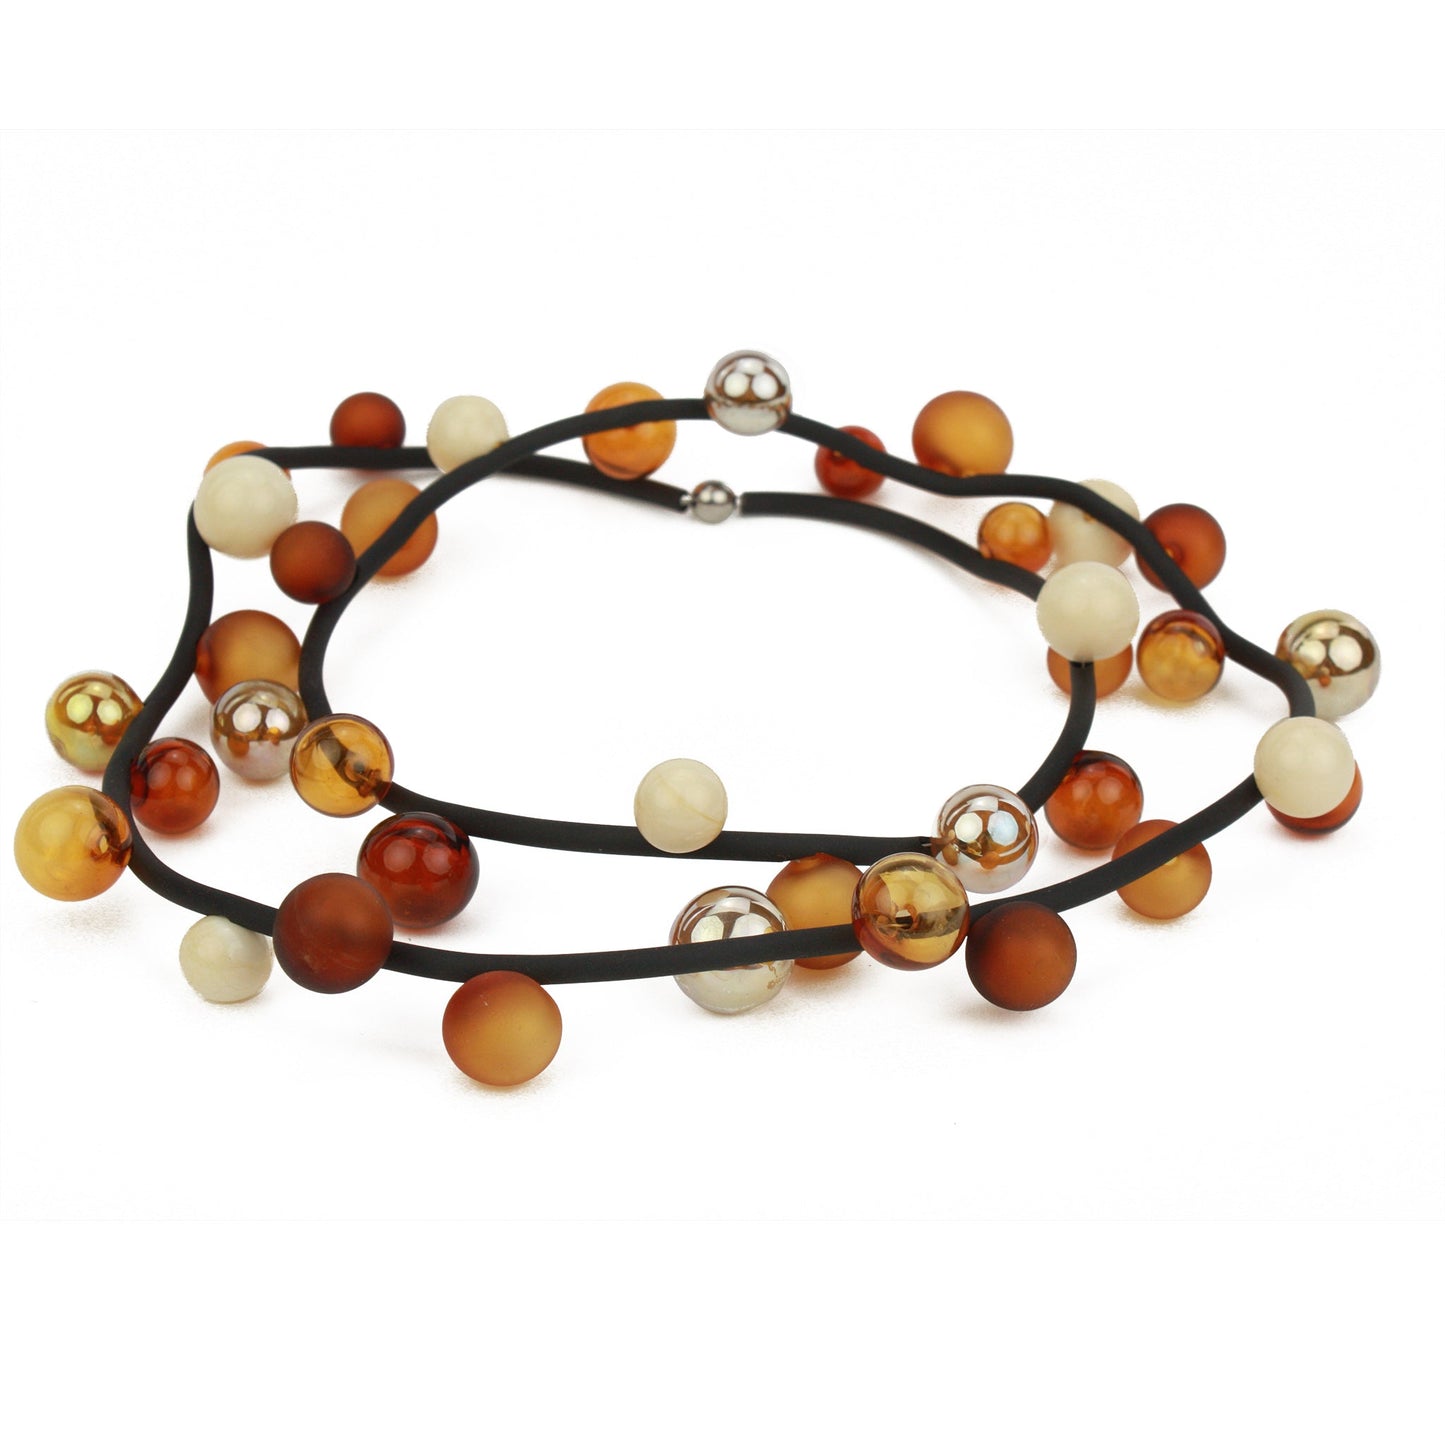 Bolla Necklace Long -Amber, ivory and gold